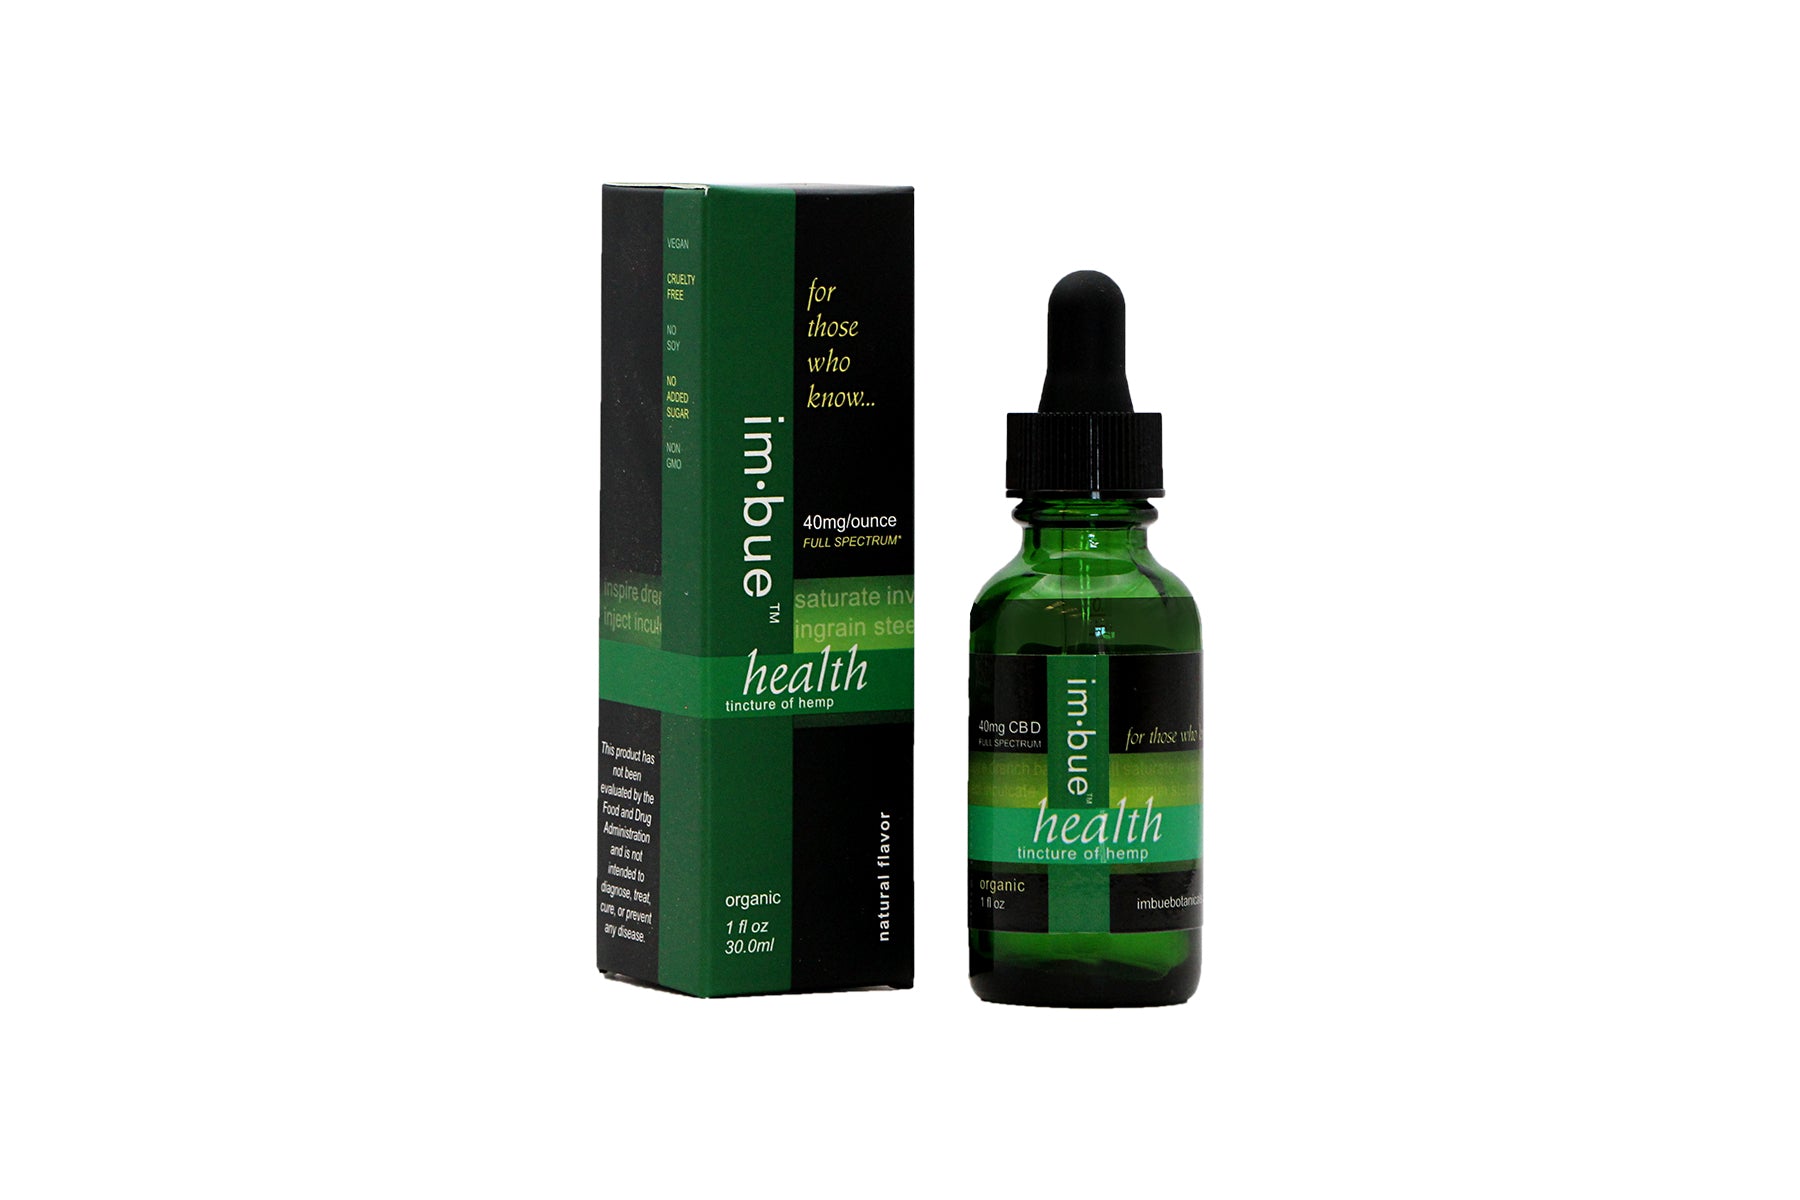 40mg health tincture of hemo box and bottle on white background